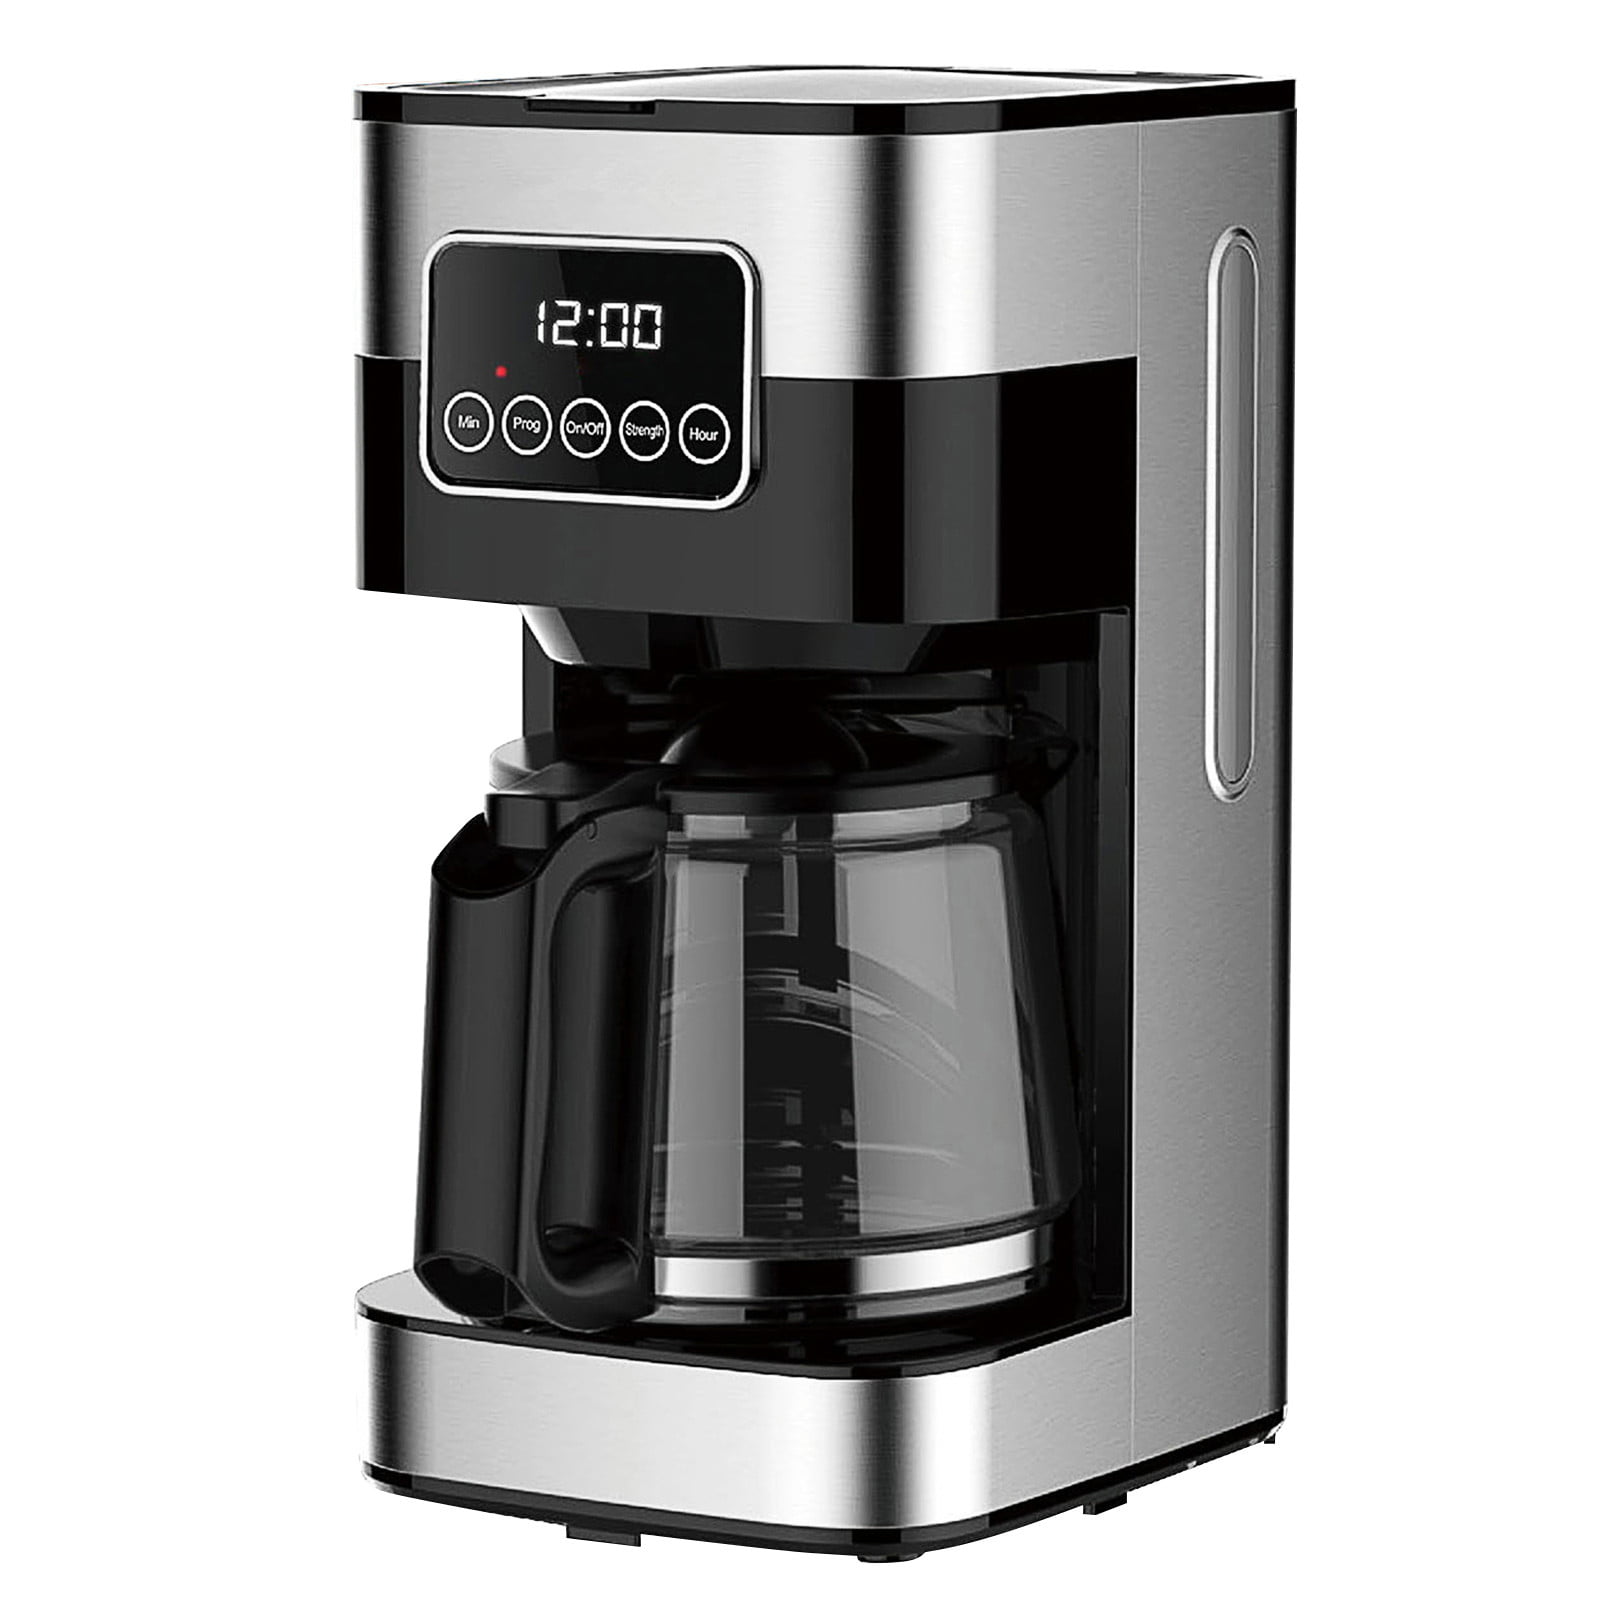 Details about   Programmable Coffee Maker Automatic Drip 12 Cup Electric Appliance Black/Grey 